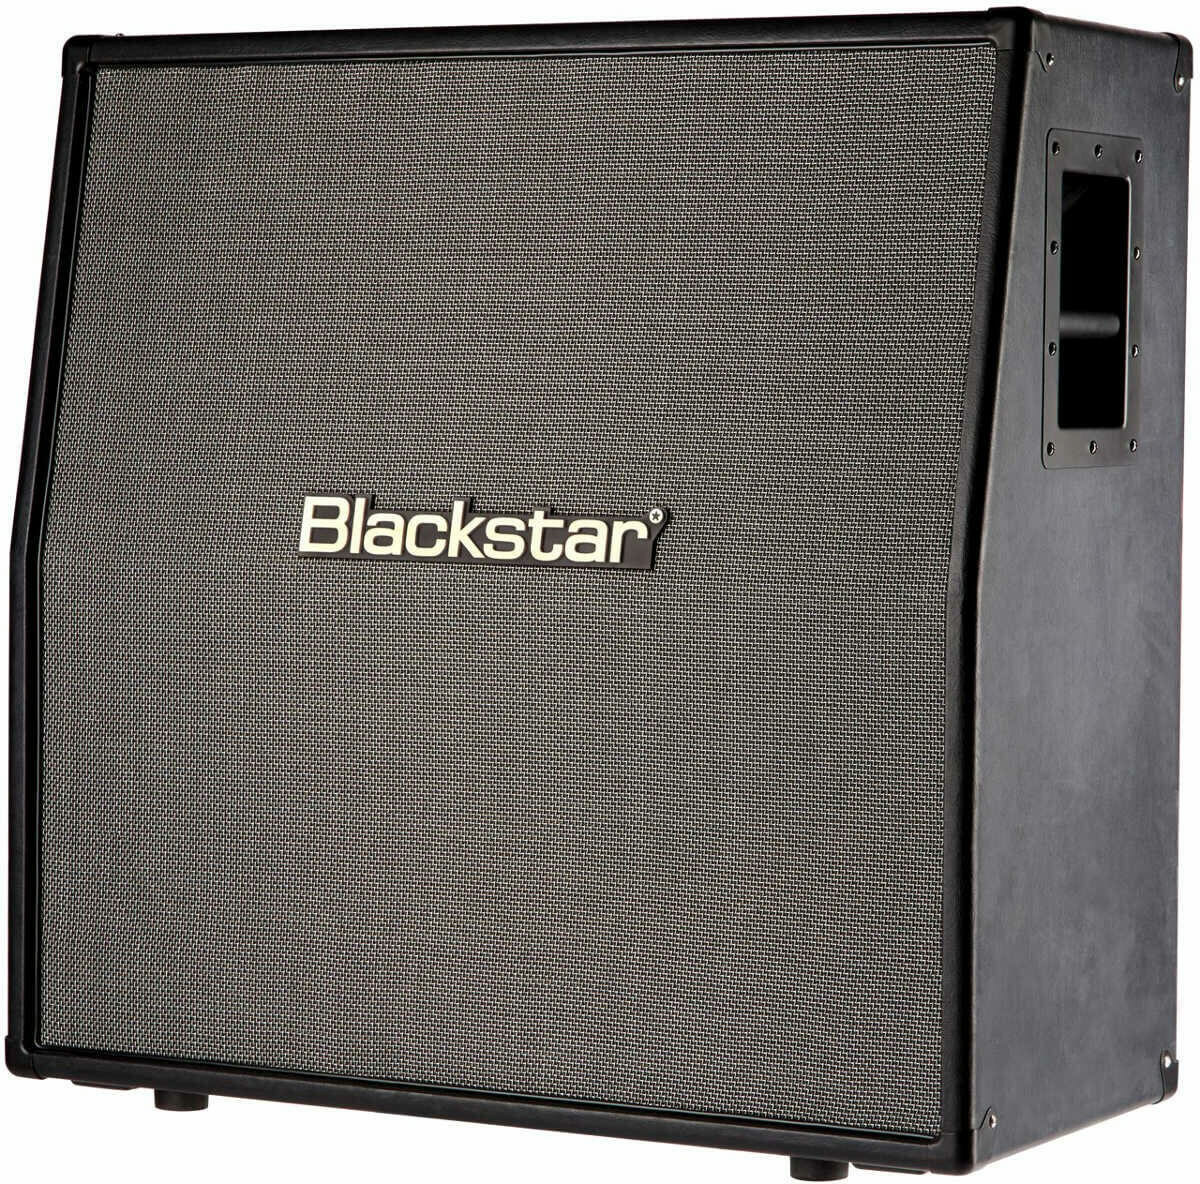 Blackstar Ht 412a Mkii Venue 320w 4x12 4/16 Ou 2x8-ohms Stereo Pan Coupe - Electric guitar amp cabinet - Main picture